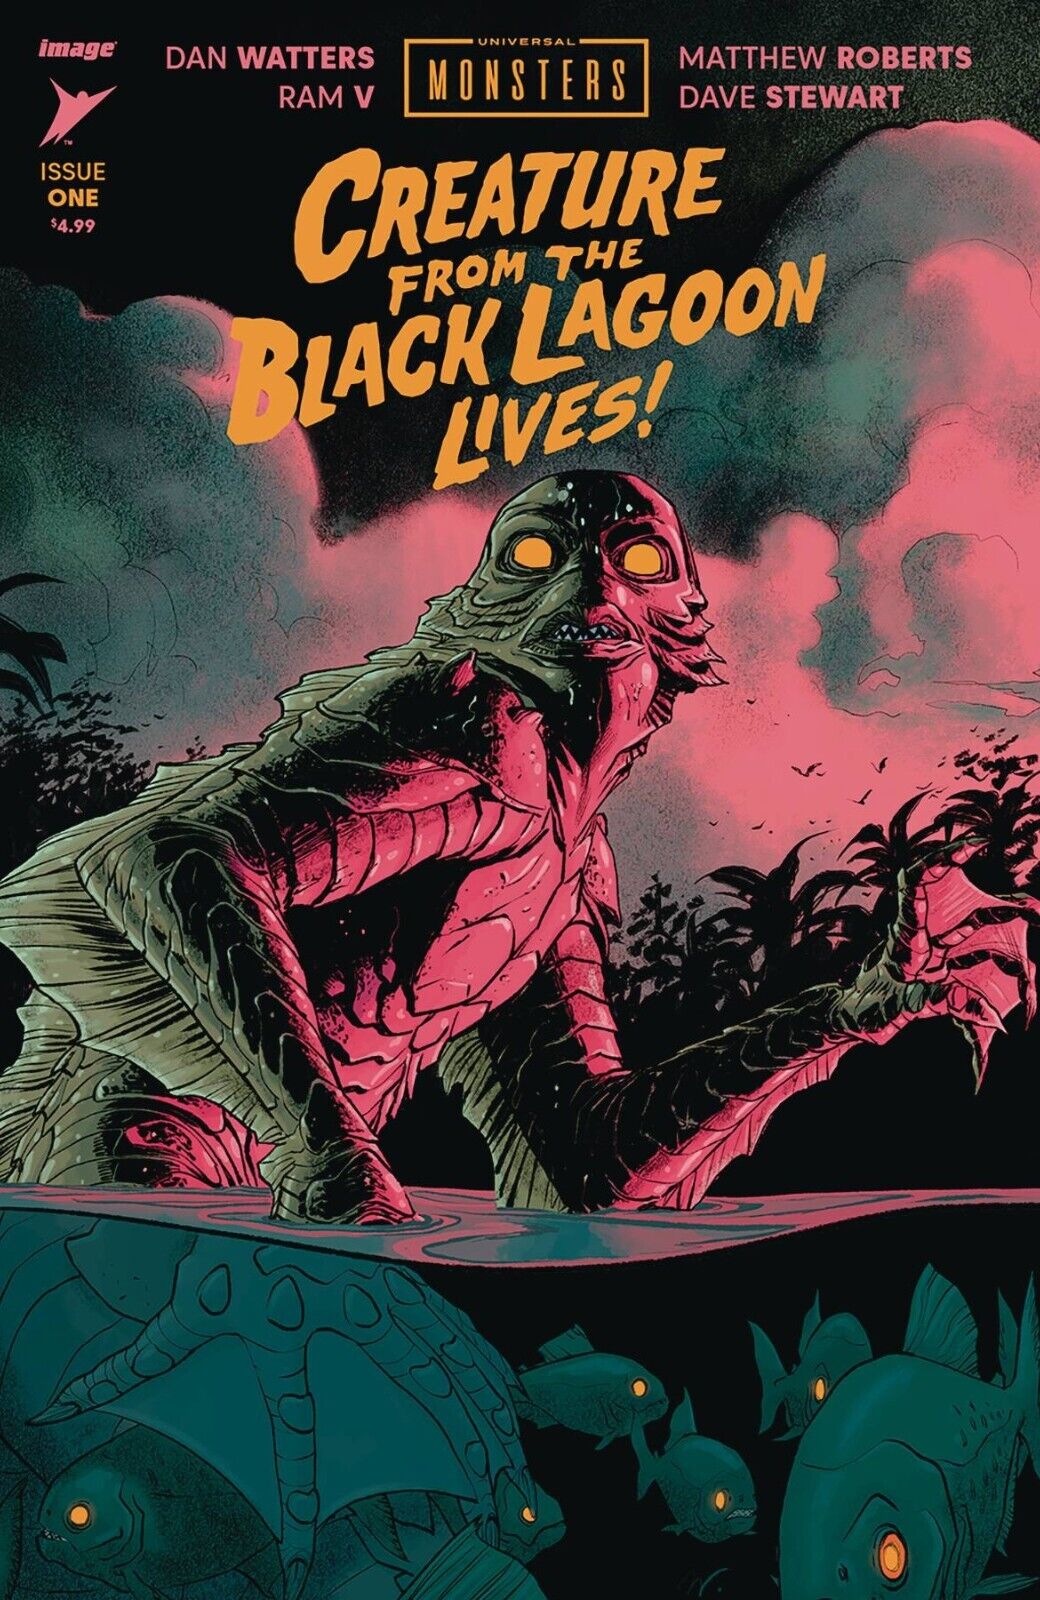 Creature from the Black Lagoon Lives #1  (Image Comics, 2024) - A Cover